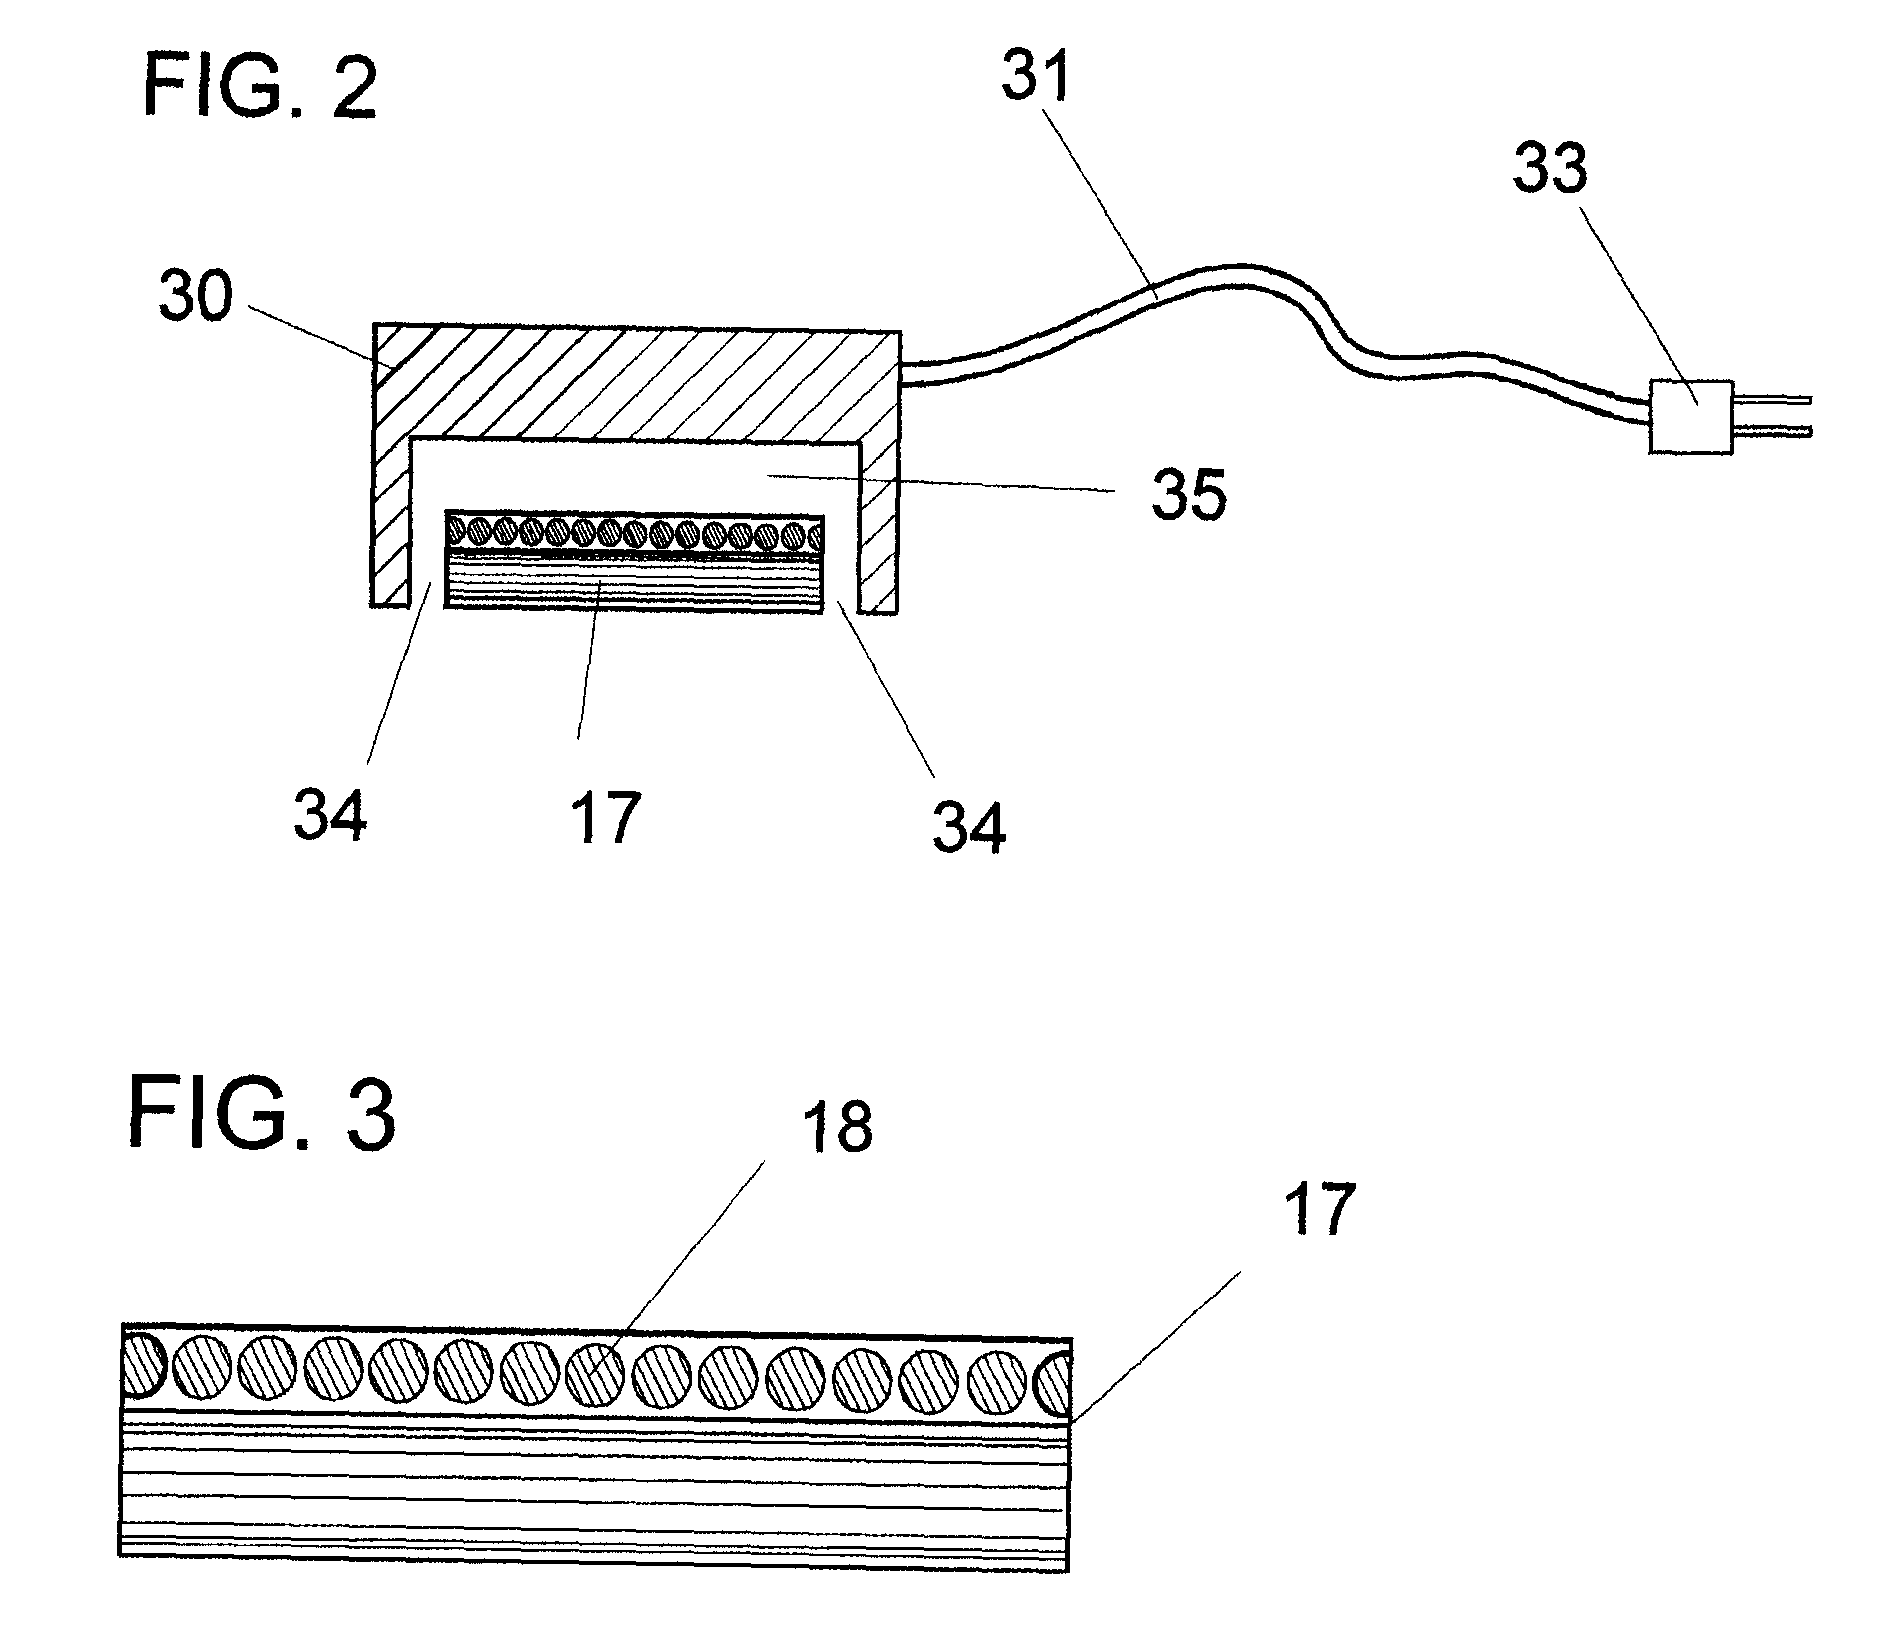 Apparatus And Method For Detecting Transmission Belt Wear And Monitoring Belt Drive System Performance